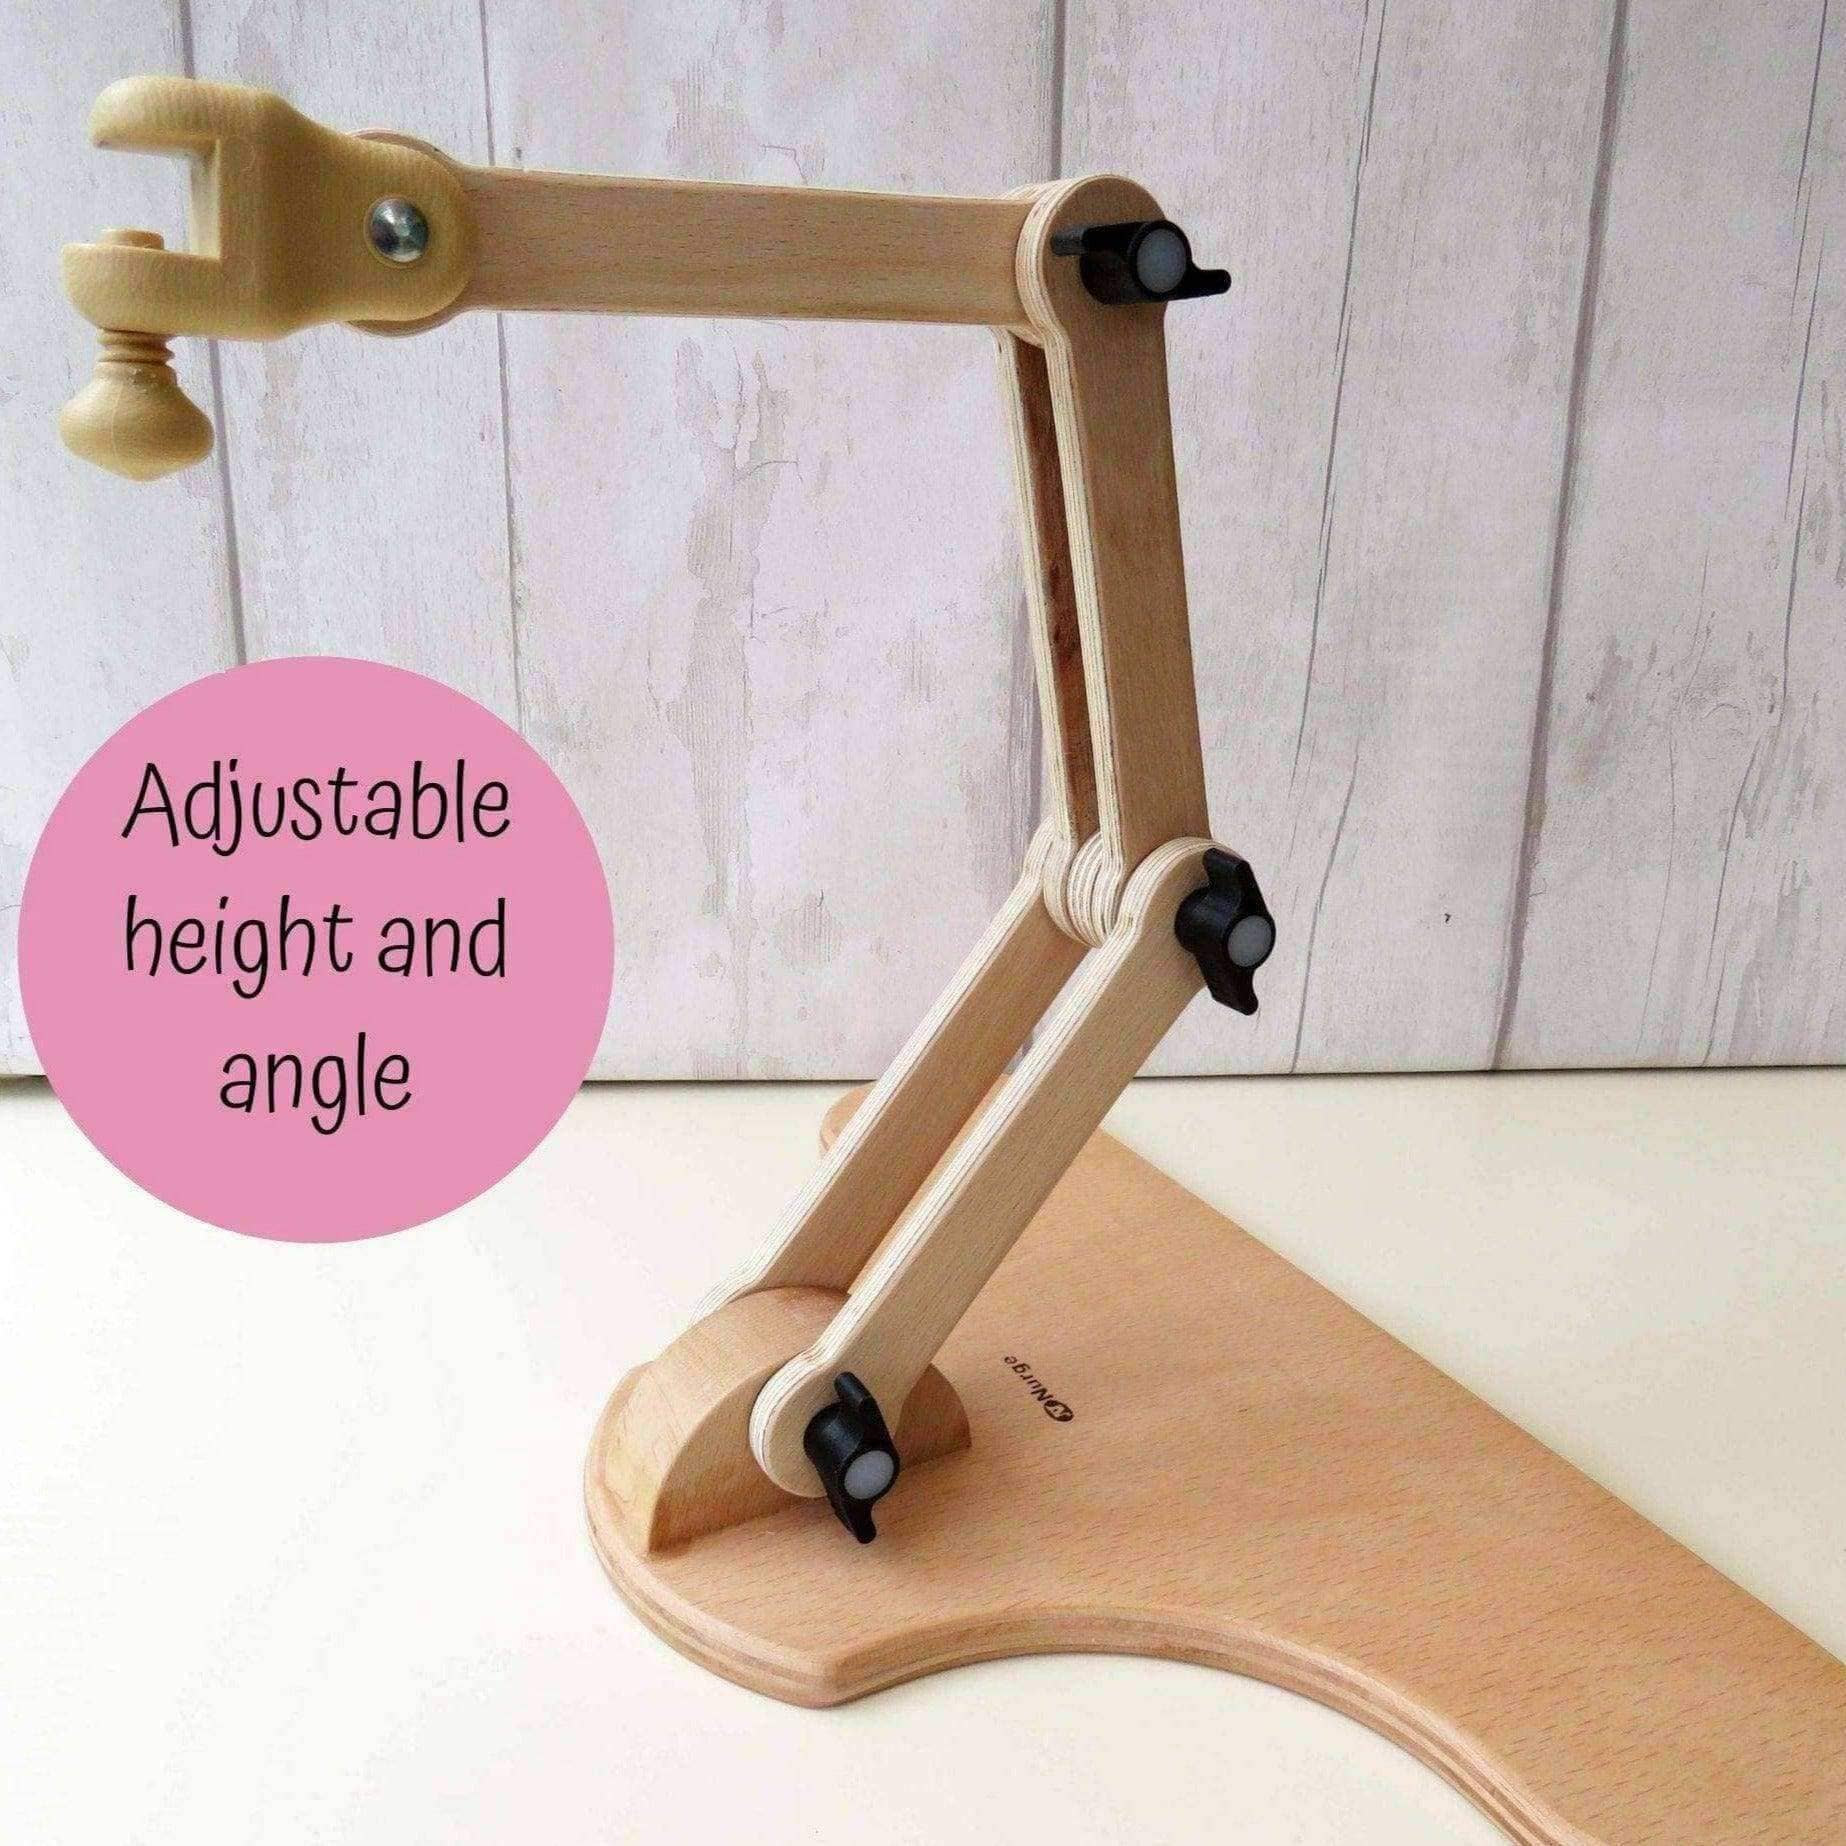 Adjustable Legged Embroidery Stand Nurge 190-5, Size: One Size